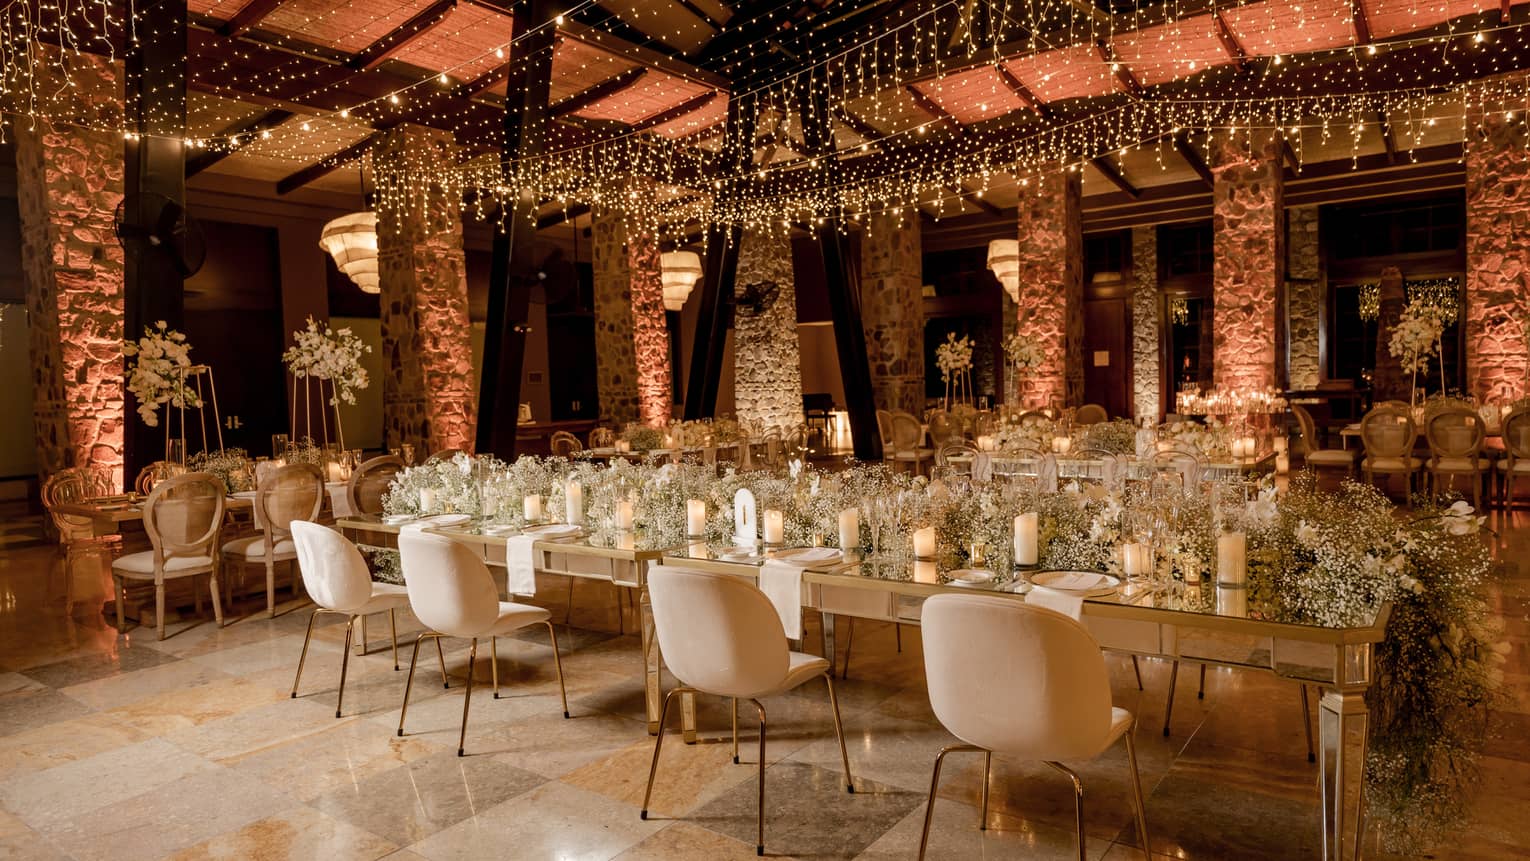 Ornately decorated function room arranged banquet style with stone pillars